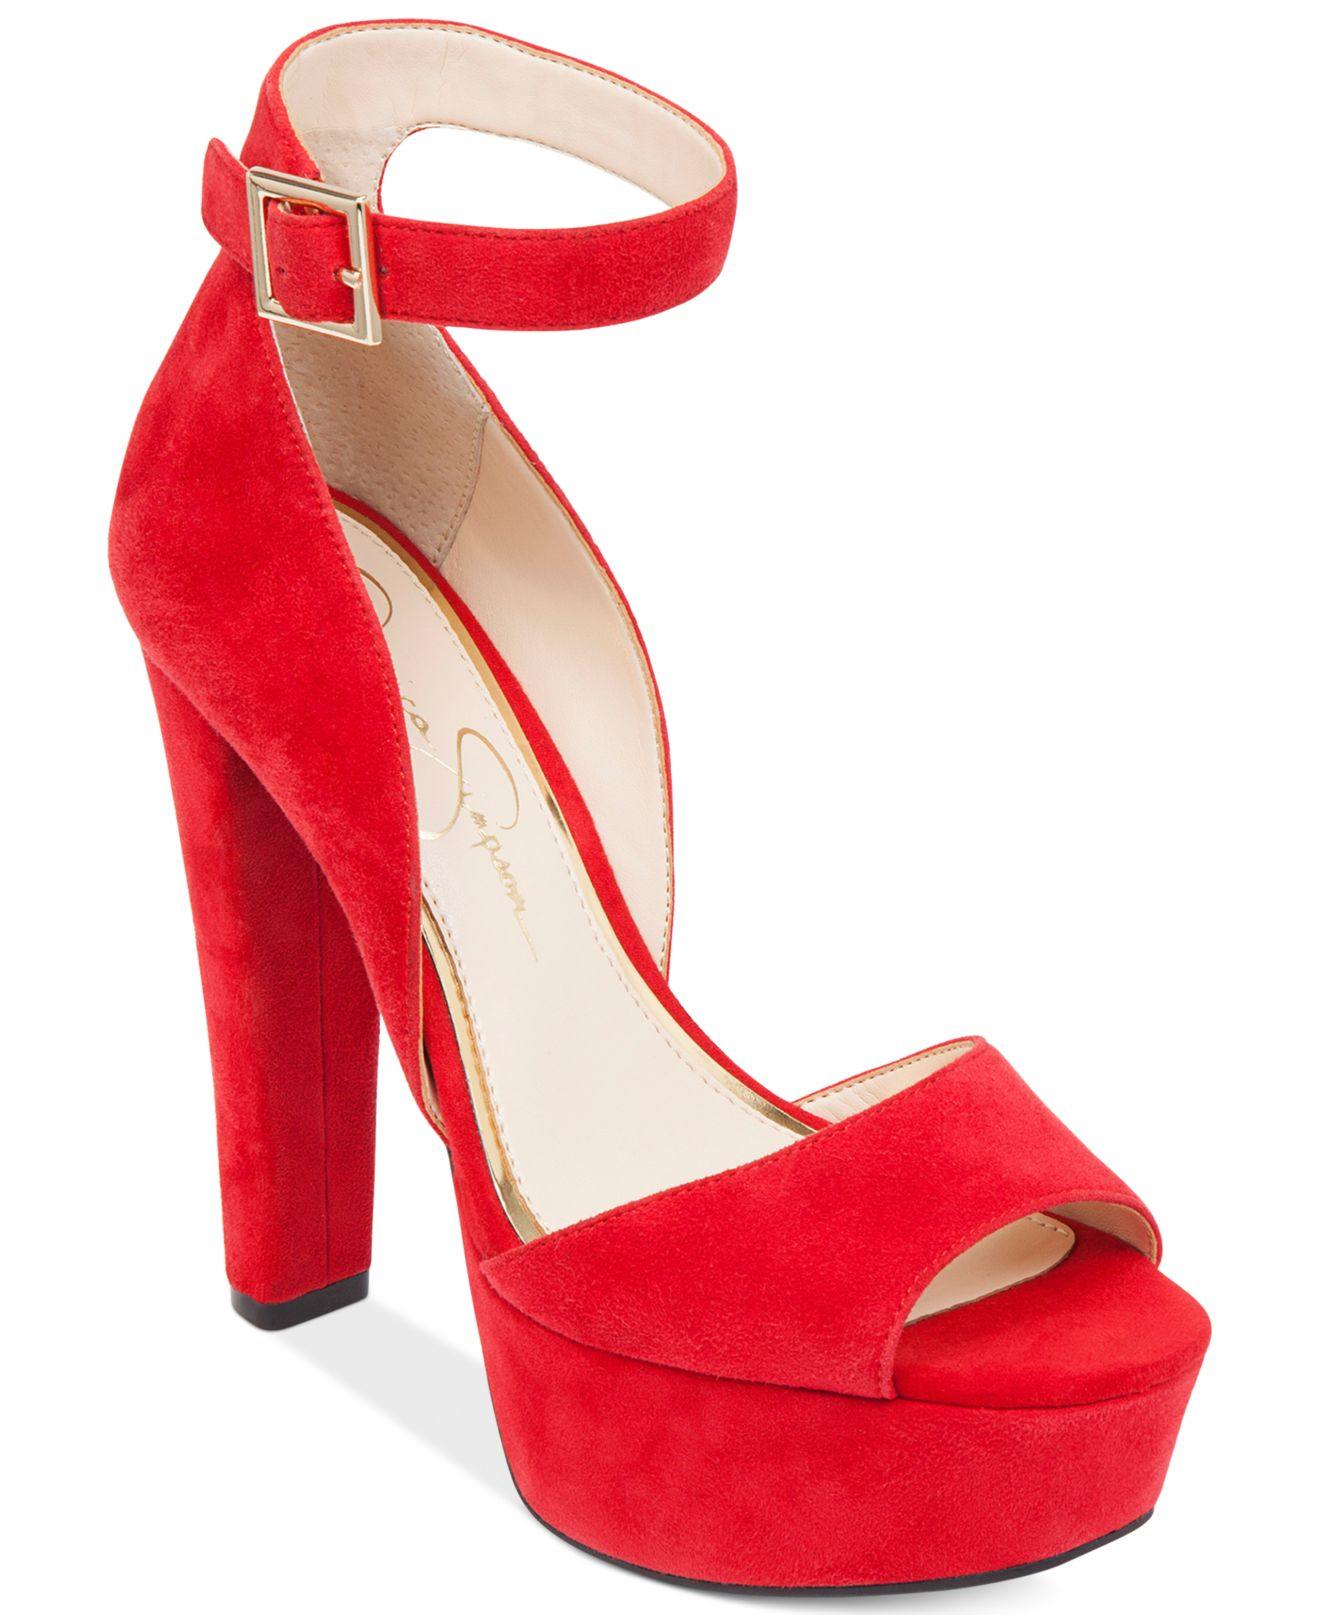 Jessica Simpson Athens Two-piece Platform Sandals in Red - Lyst